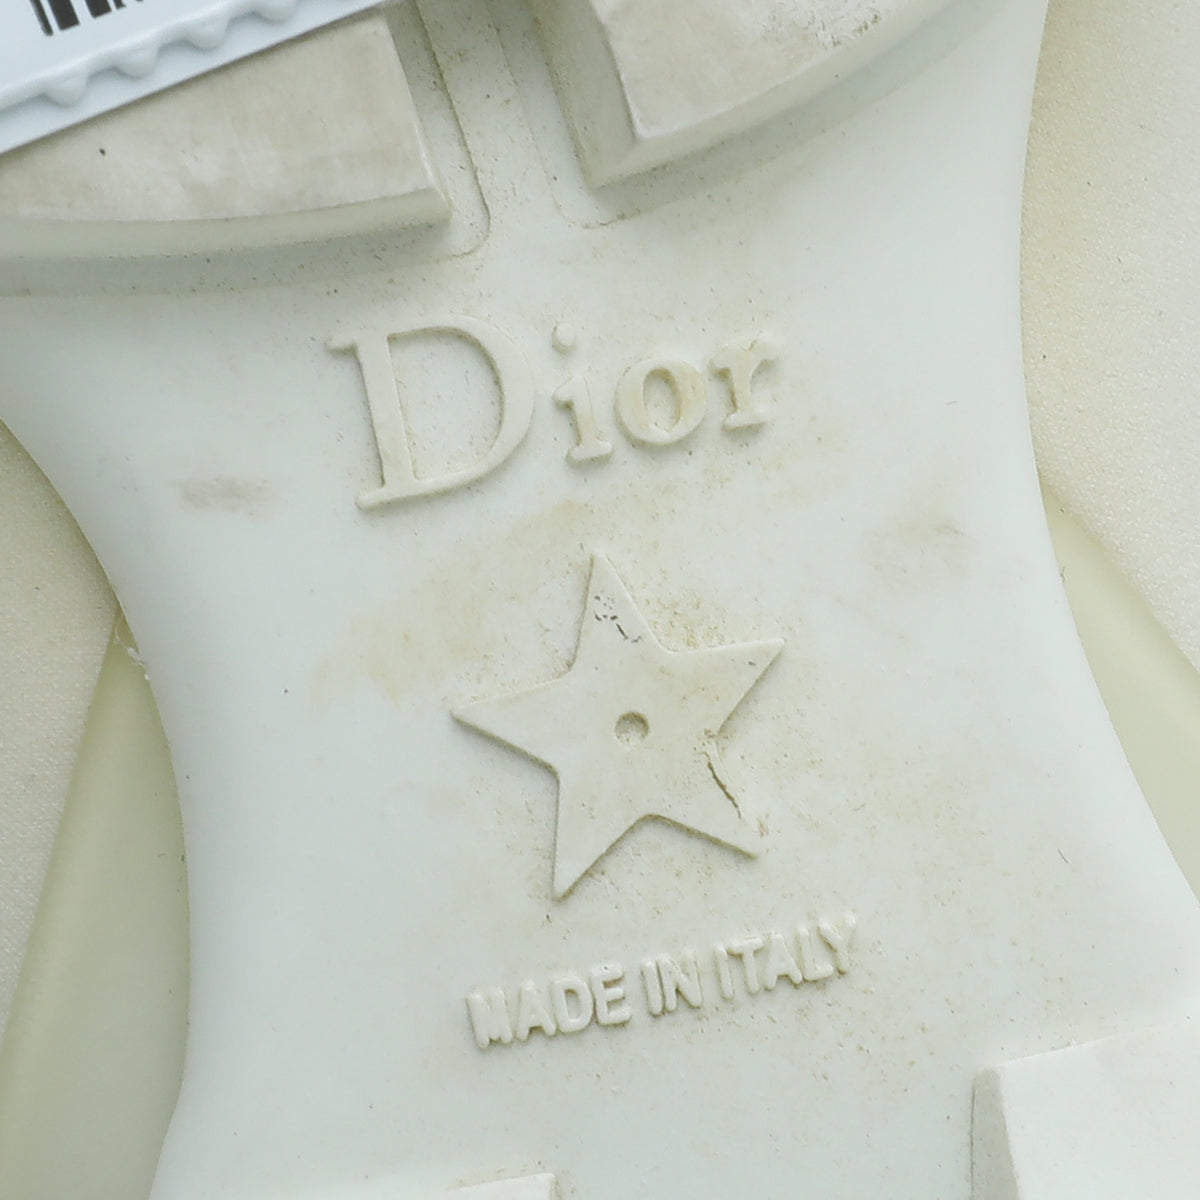 Christian Dior White D-Connect Technical Fabric Sneaker 40